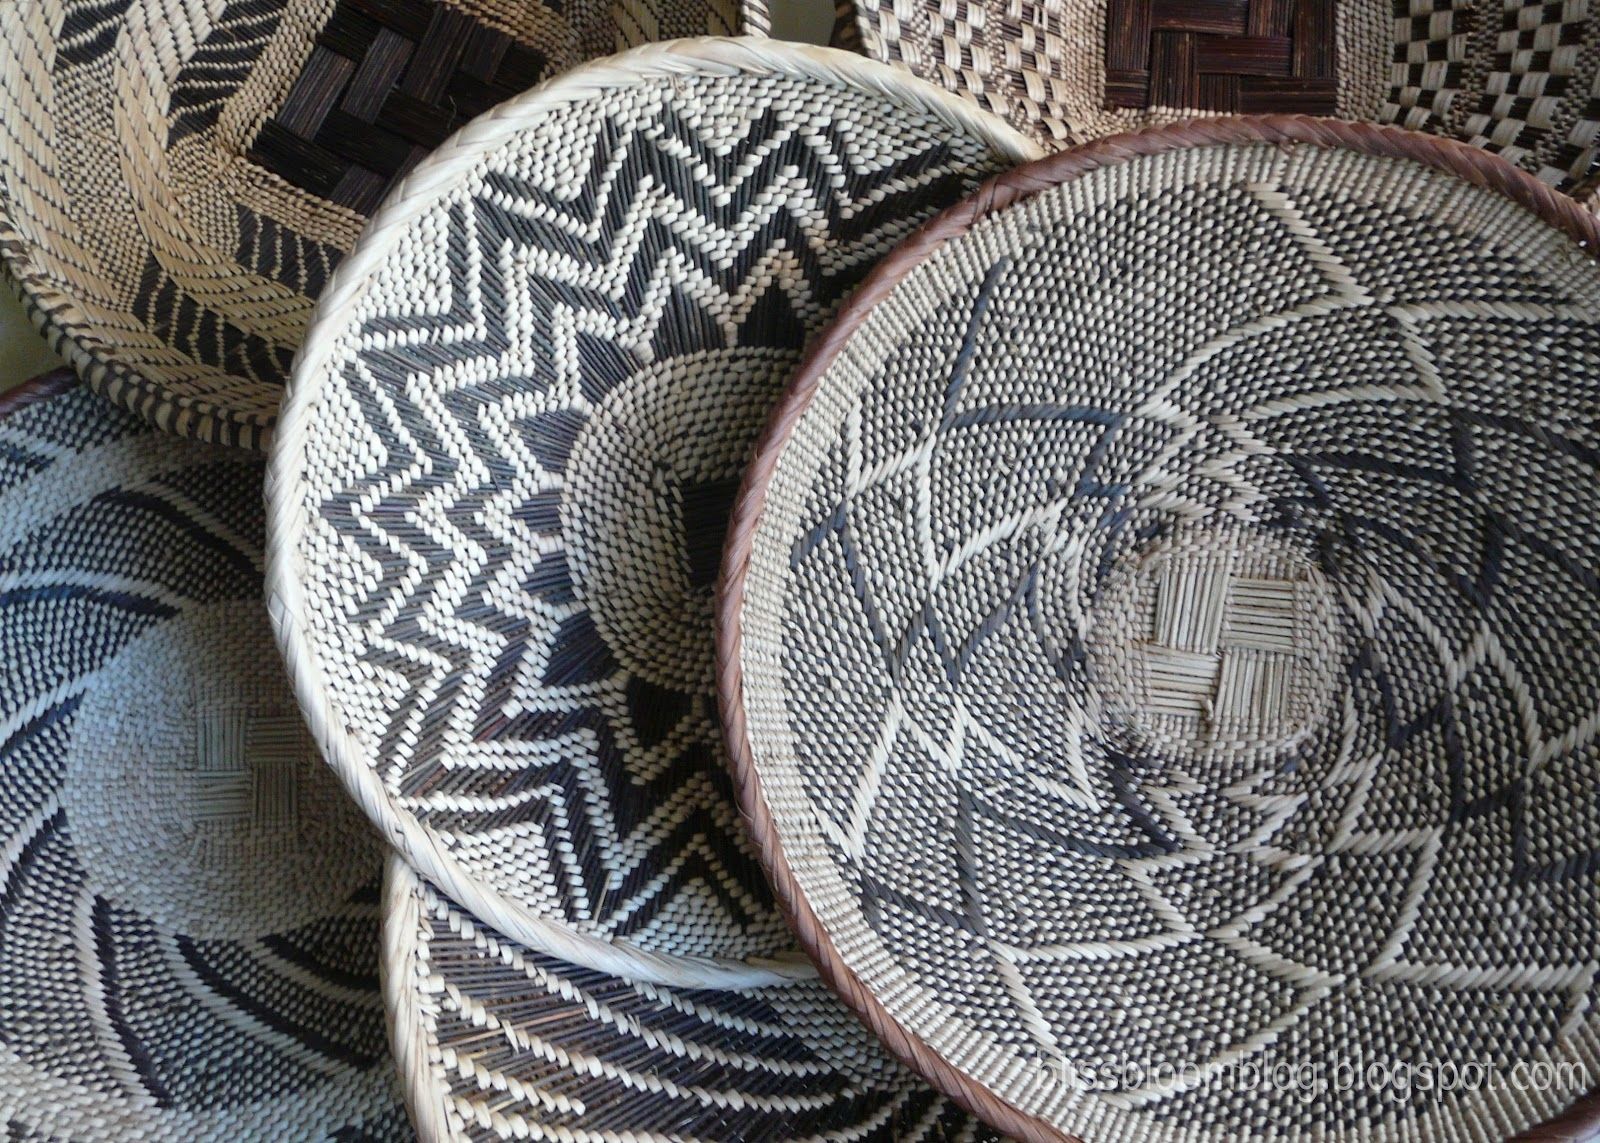 Home] African Basket Wall Decor, Woven Basket Wall Art – Swinki Morskie With Regard To Woven Basket Wall Art (View 6 of 20)